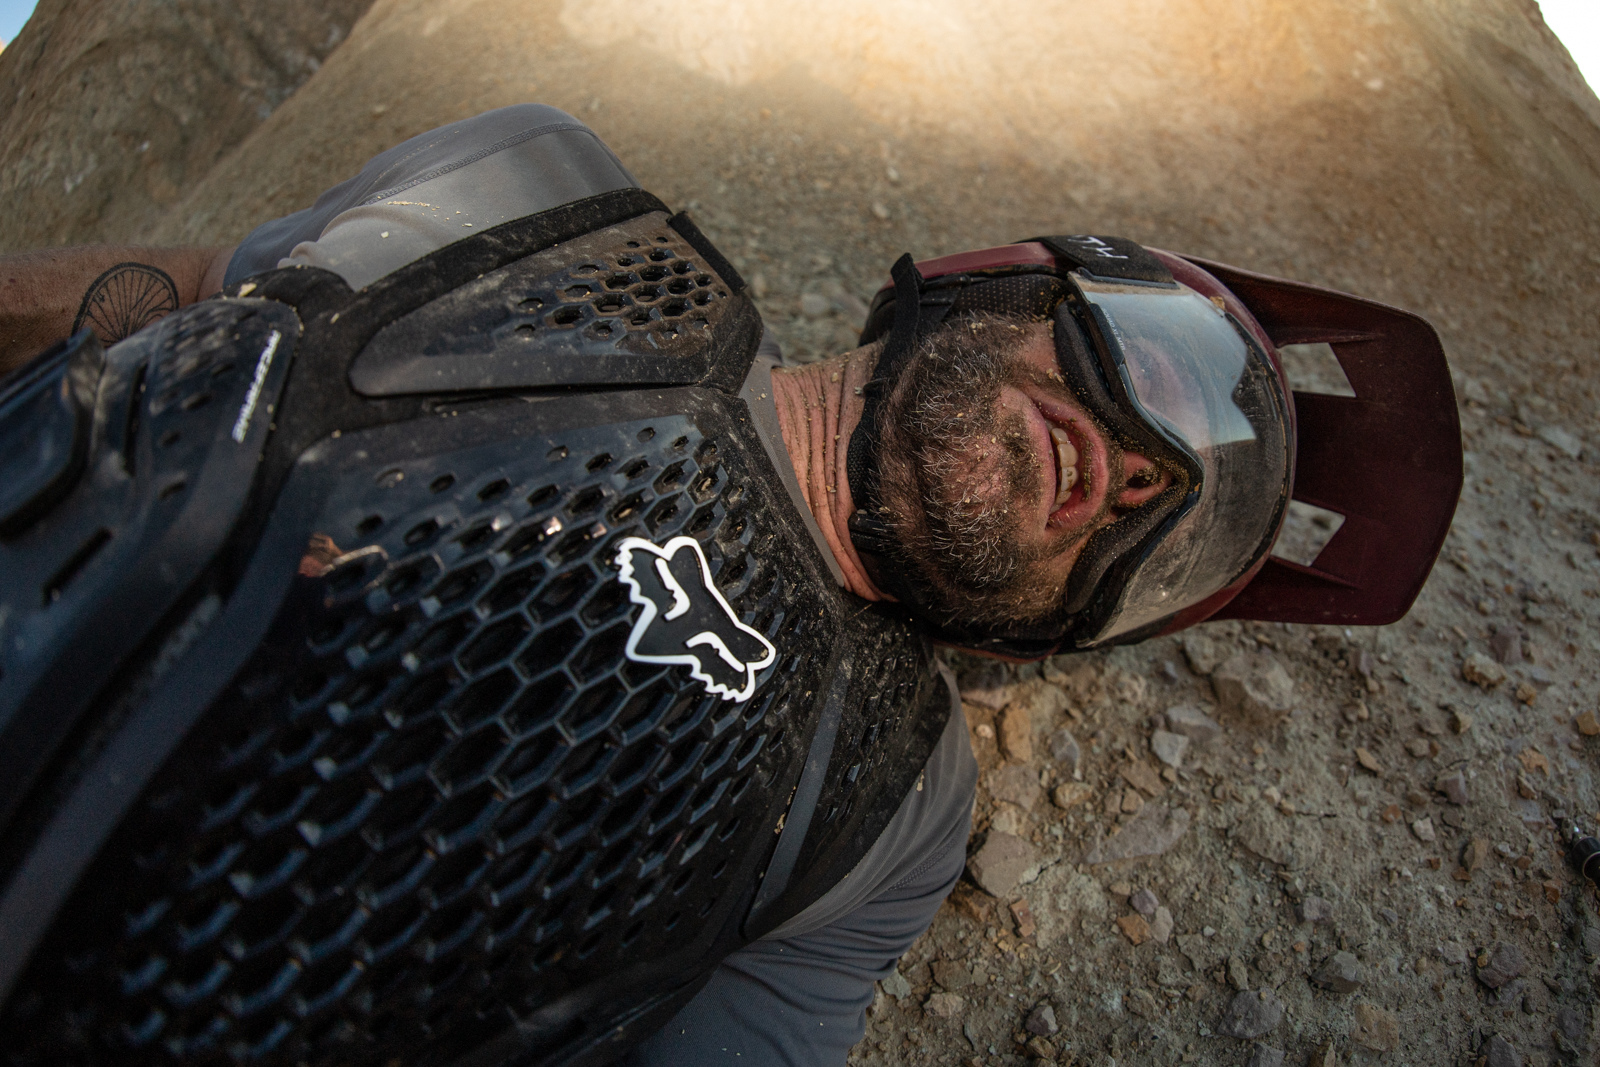 Kirt Voreis relaxes in the dirt for a minute after a crash on his mountain bike.